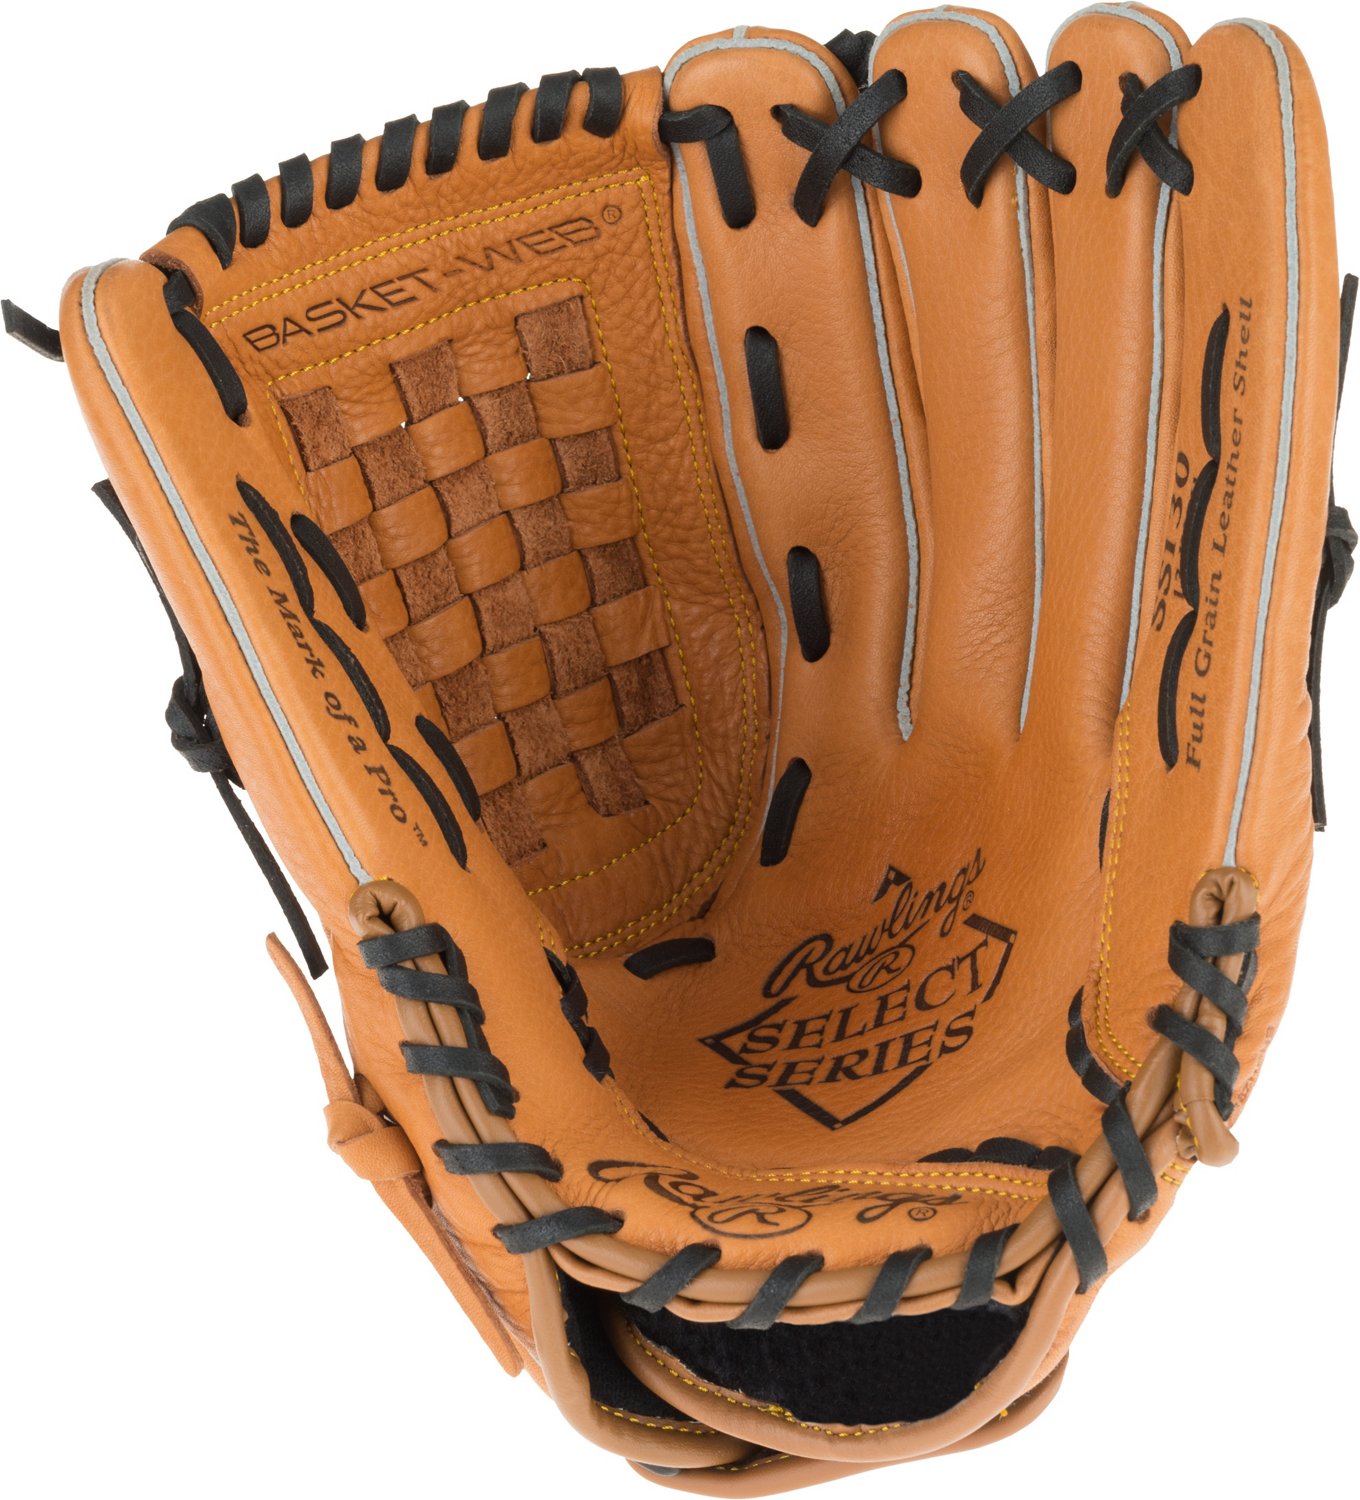 Rawlings RSB Series 13 in Slow-Pitch Softball Glove Right-handed 